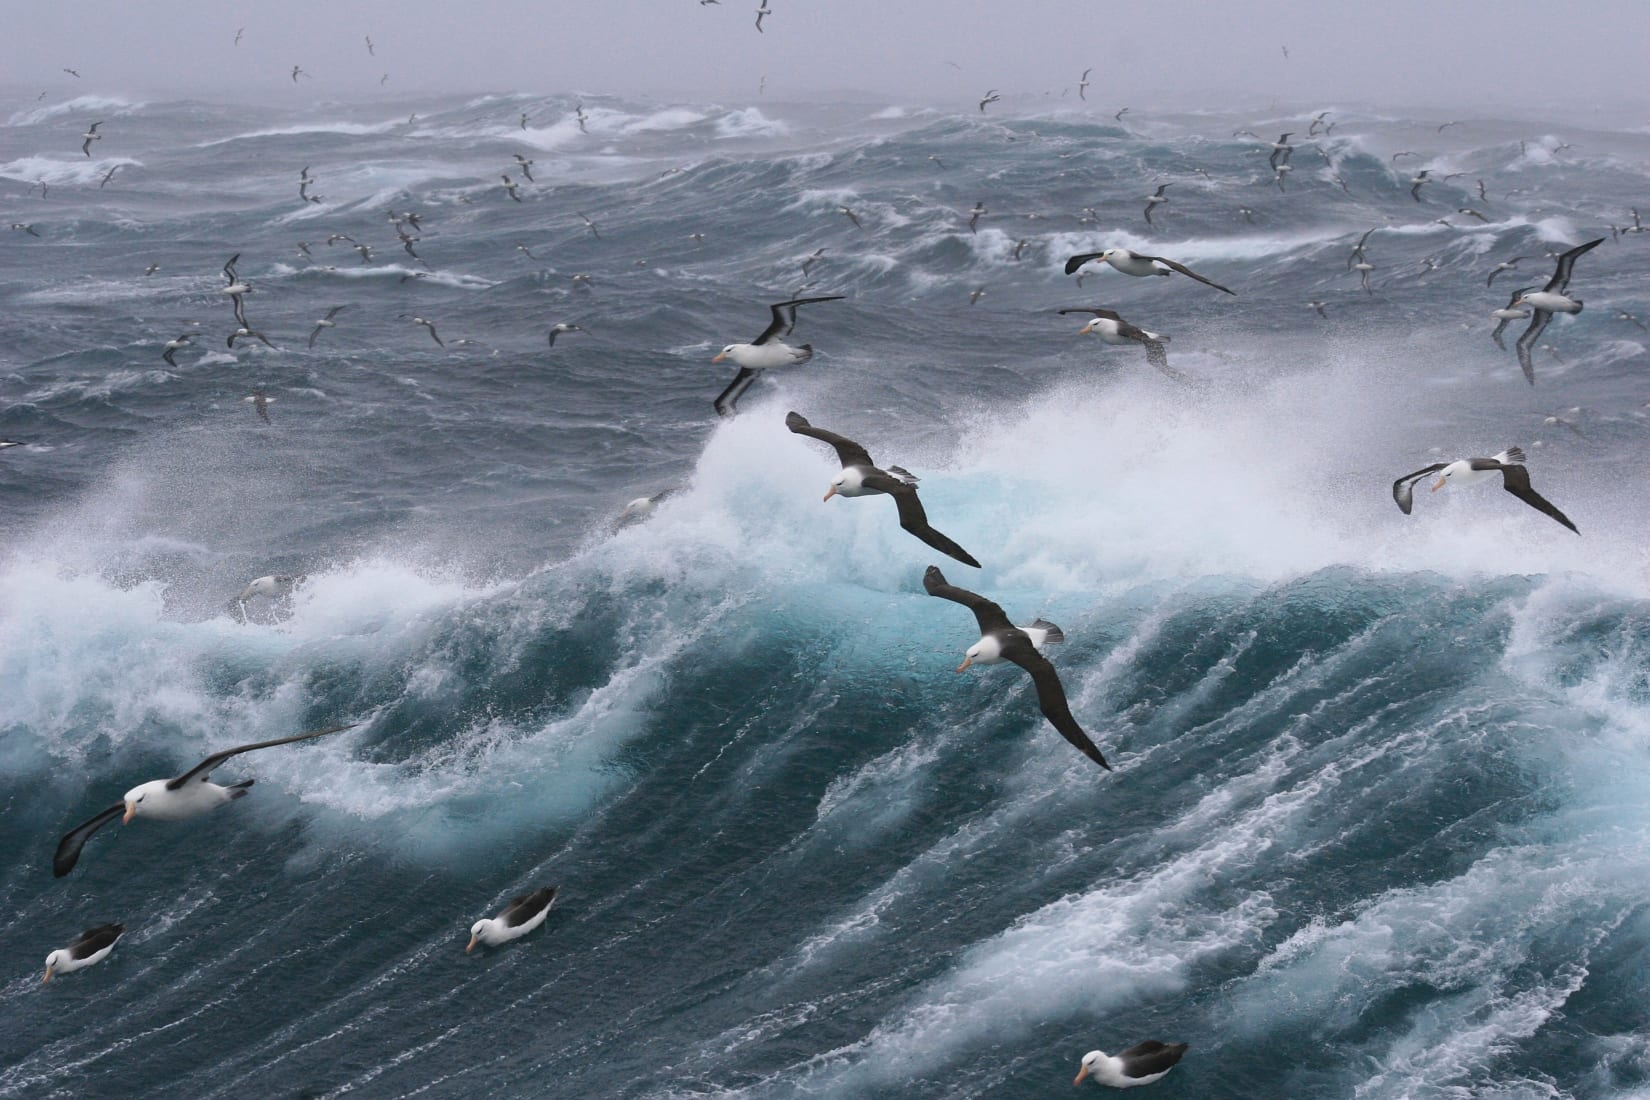 Birds flying over a large wave

Description automatically generated